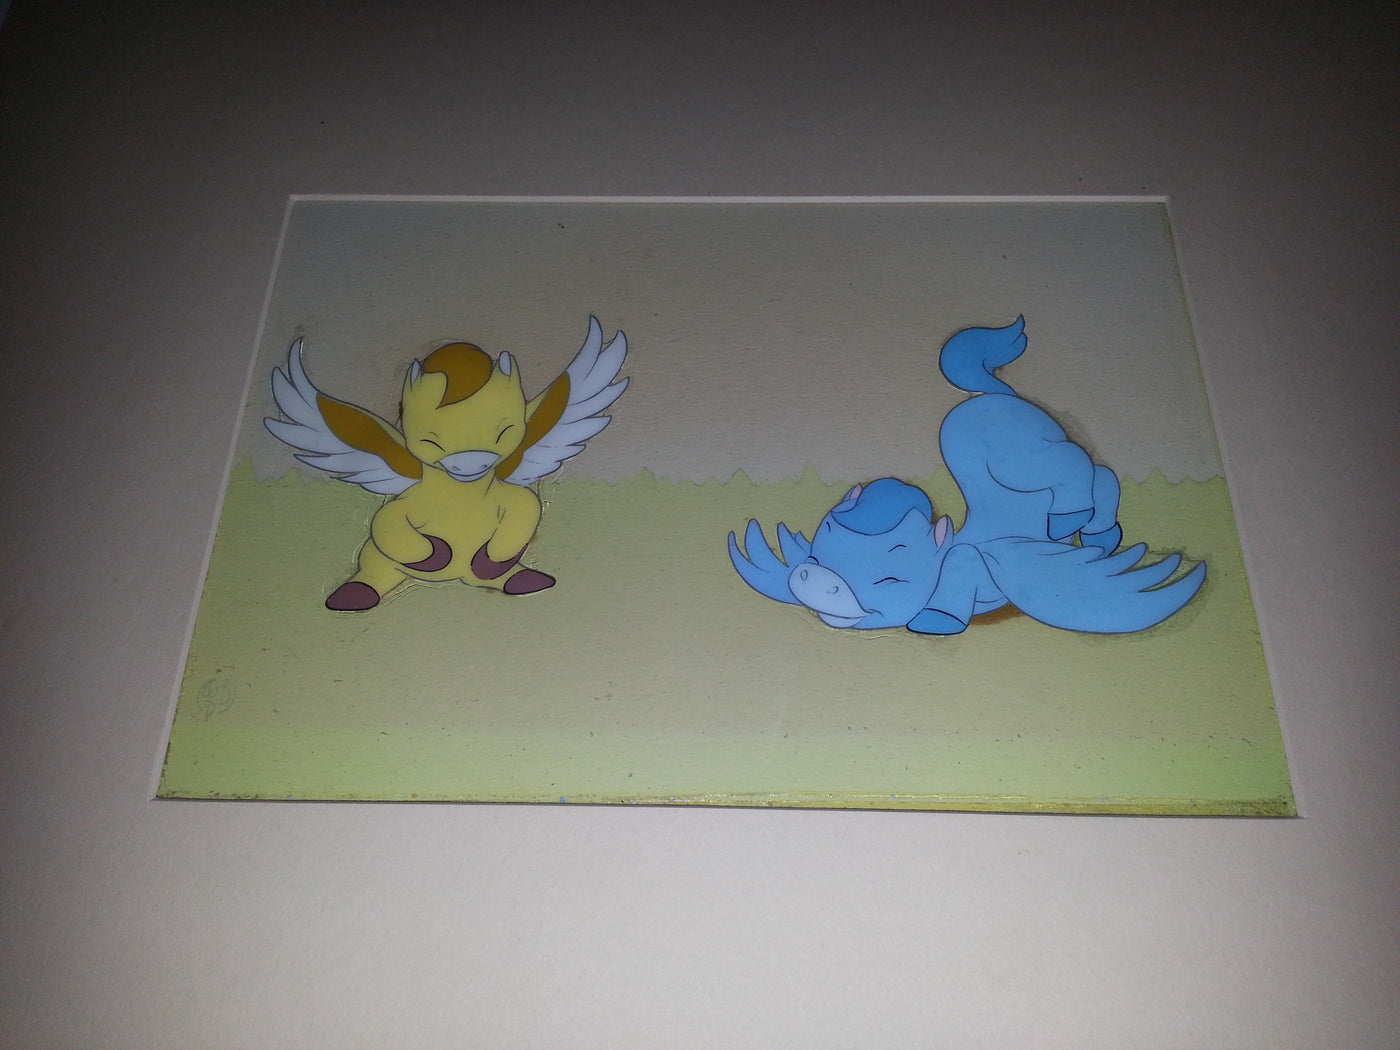 Original Walt Disney Production Cel on Courvoisier Background from Fantasia featuring Baby Pegasi